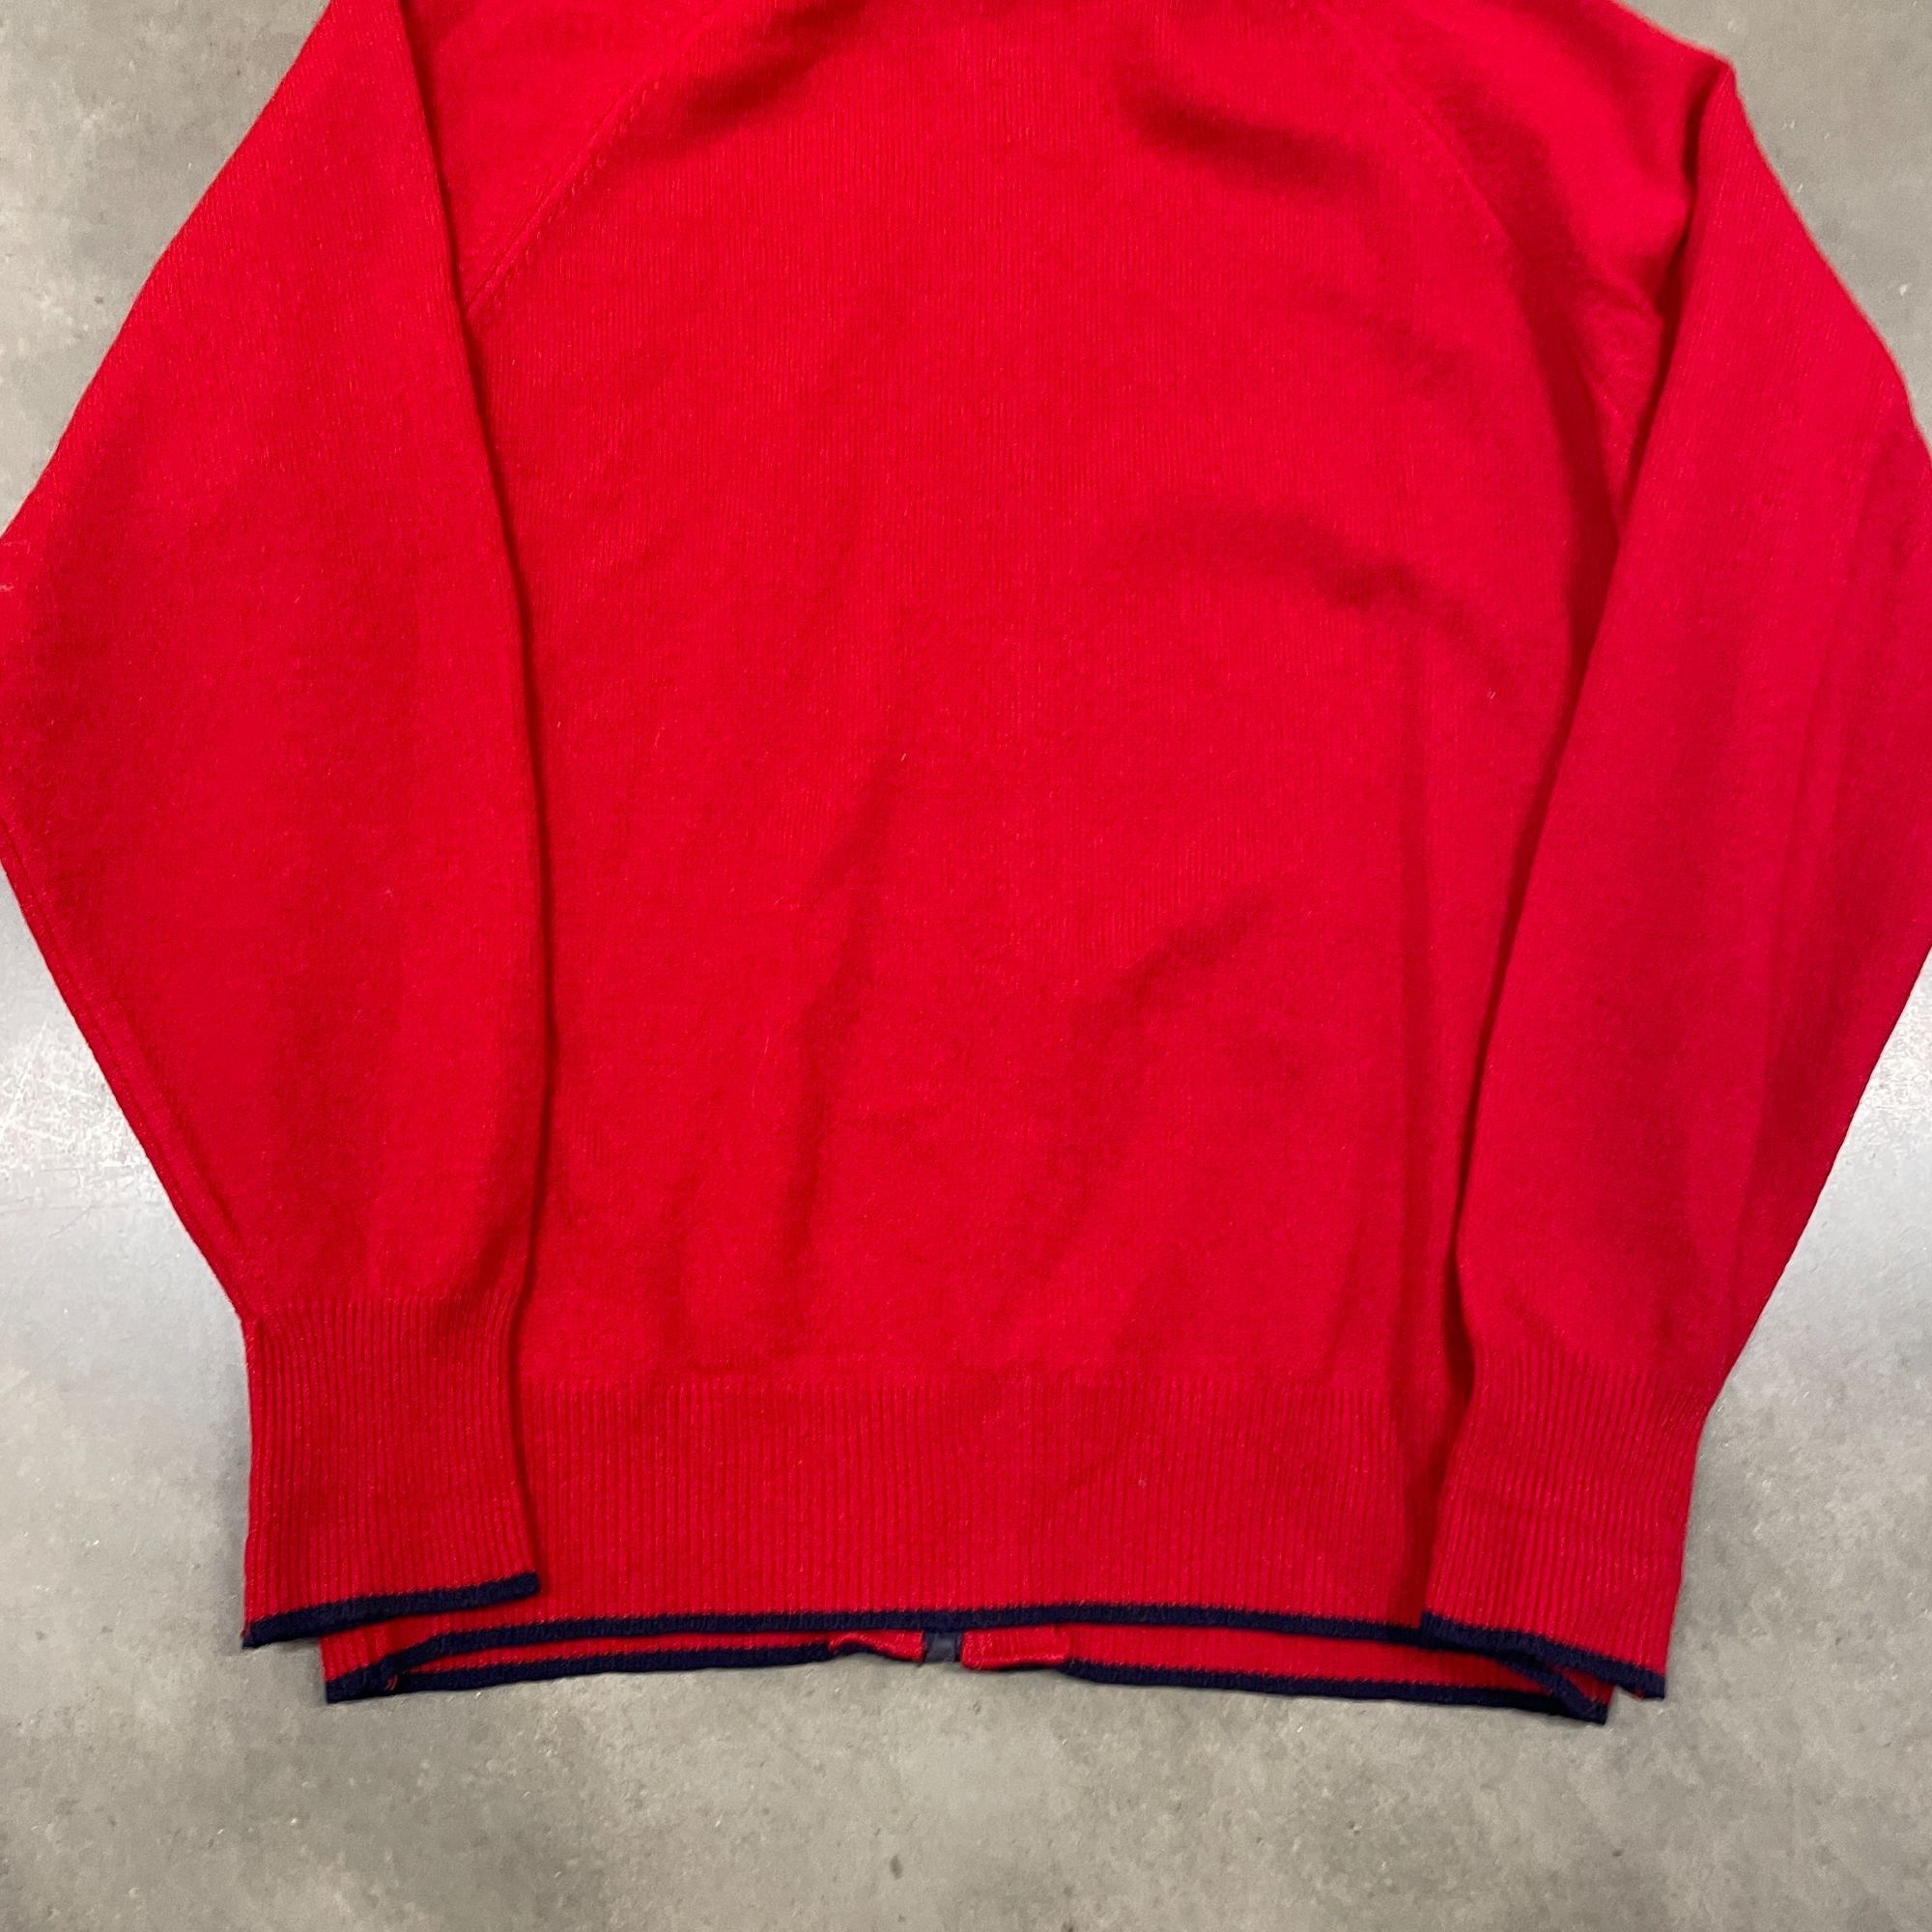 Vintage 60s VTG Red Wool Puritan Aquaknit Wool Zip Up Sweater XL Red Size US XL / EU 56 / 4 - 10 Preview